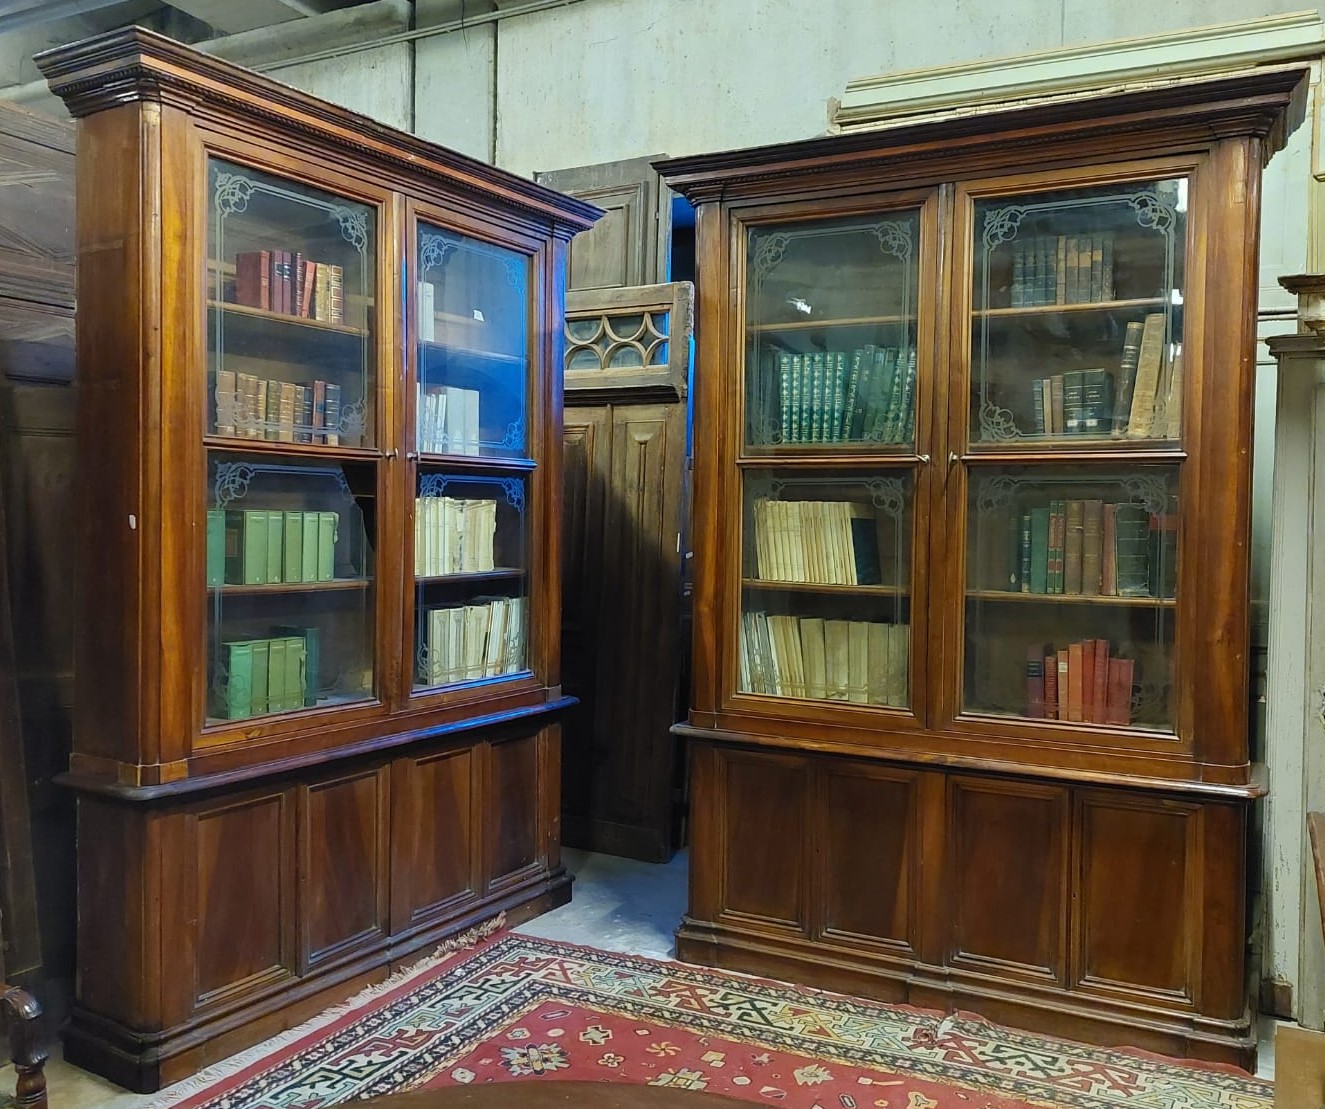 lib135 - pair of walnut wood bookcases, from the 19th cent., cm W 186 x H 273